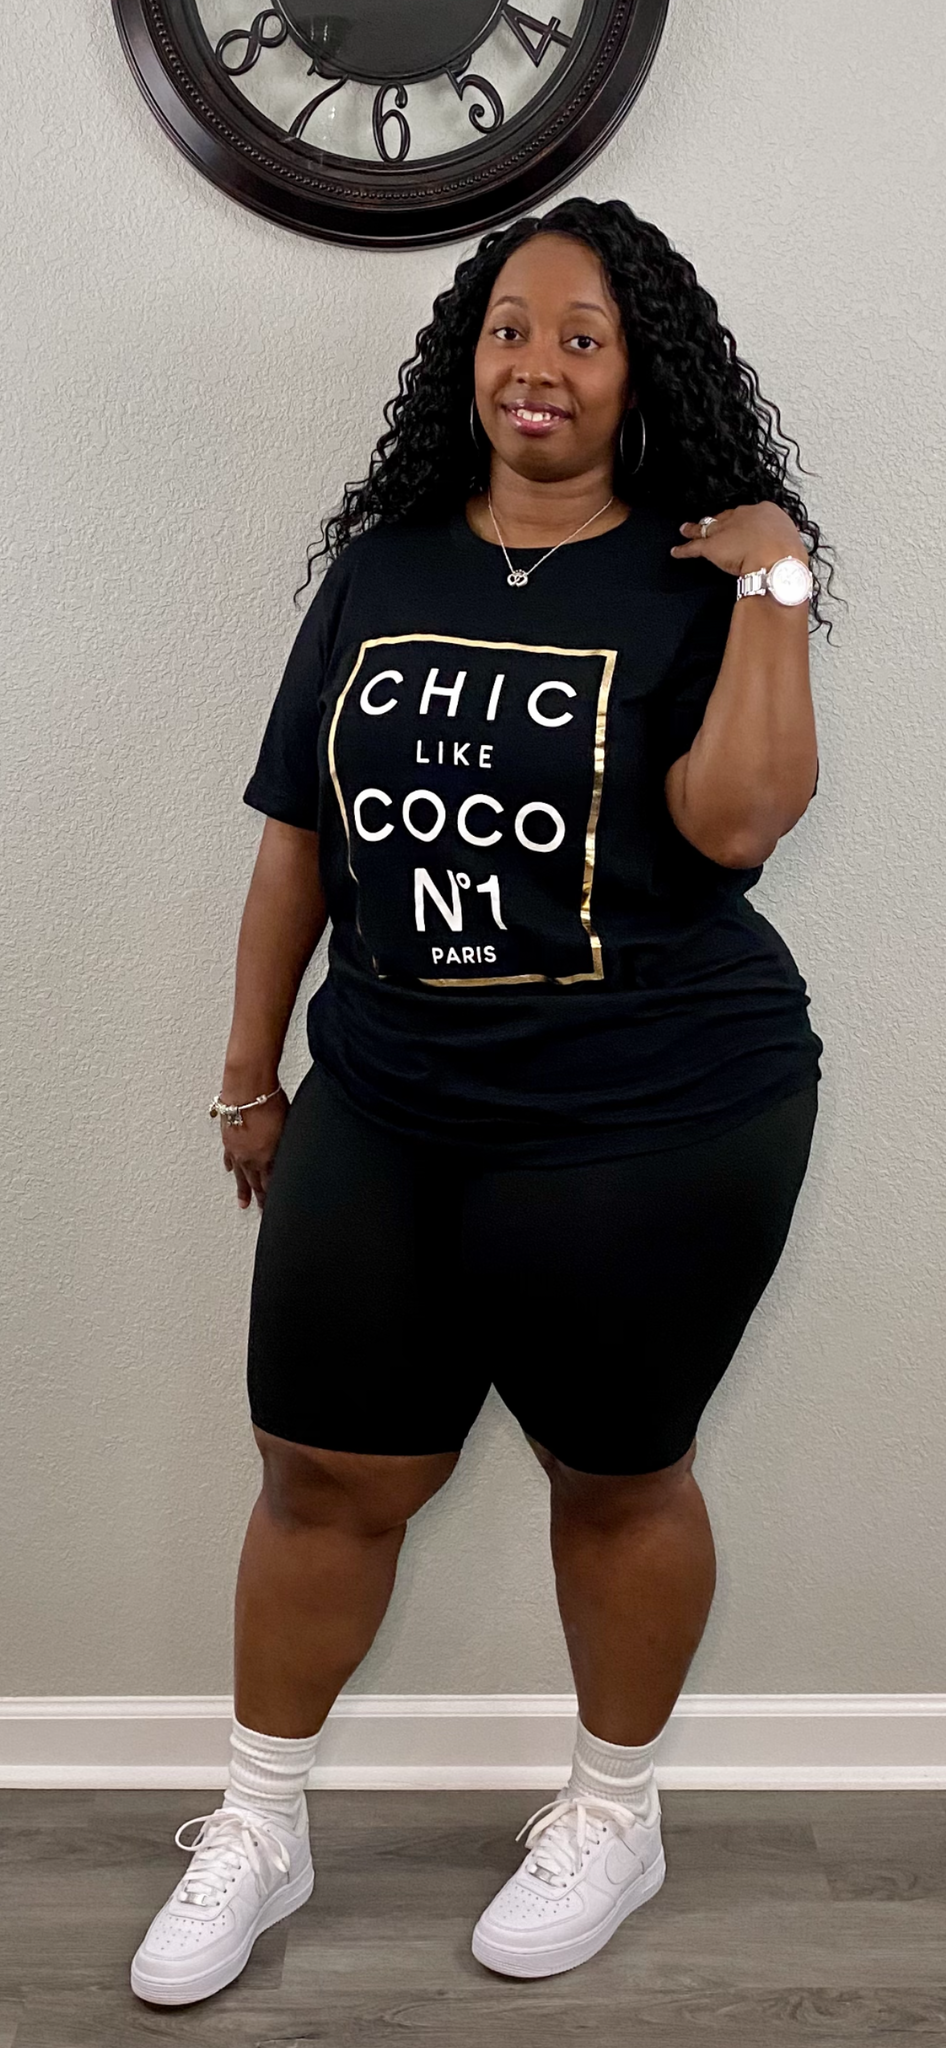 Chic Like Coco Top | (Black and Burgundy) Plus Size